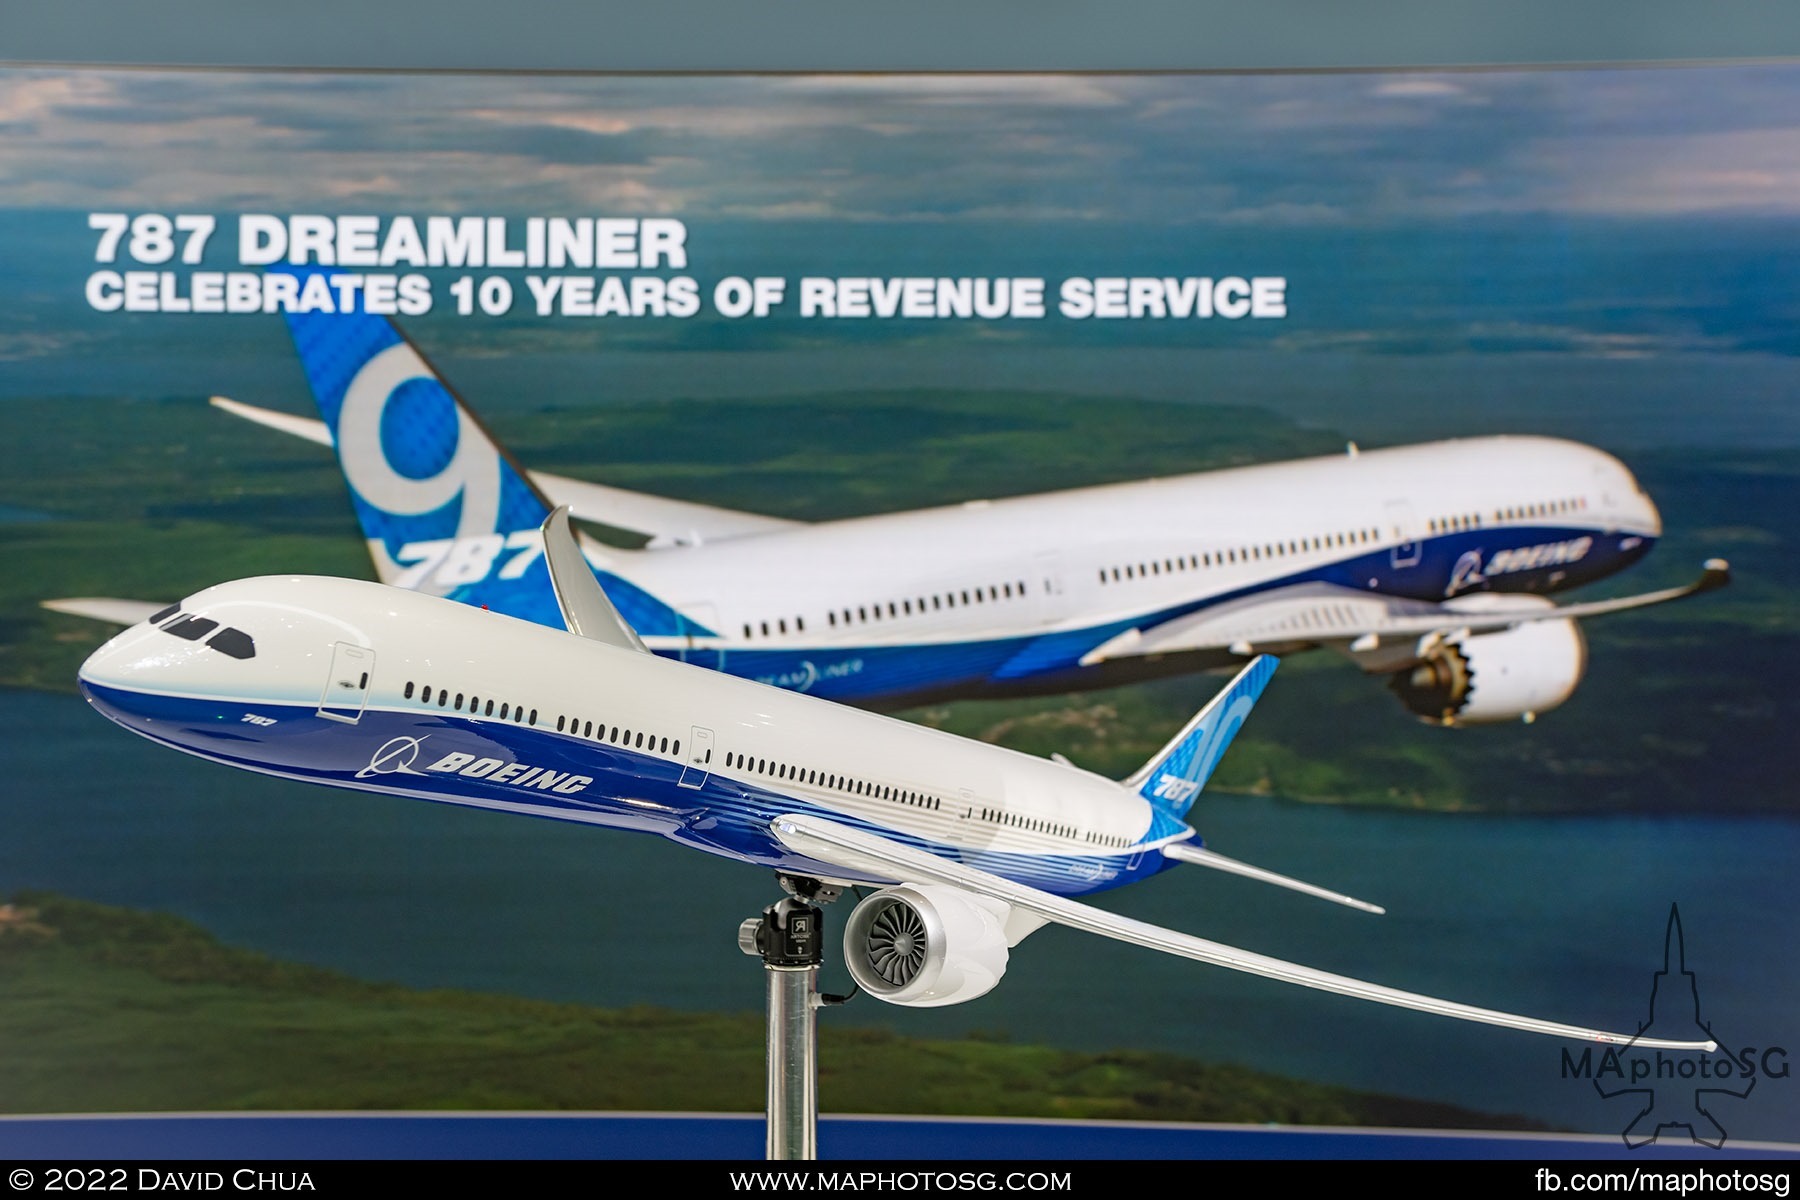 Boeing 787 Dreamliner model on display at their booth